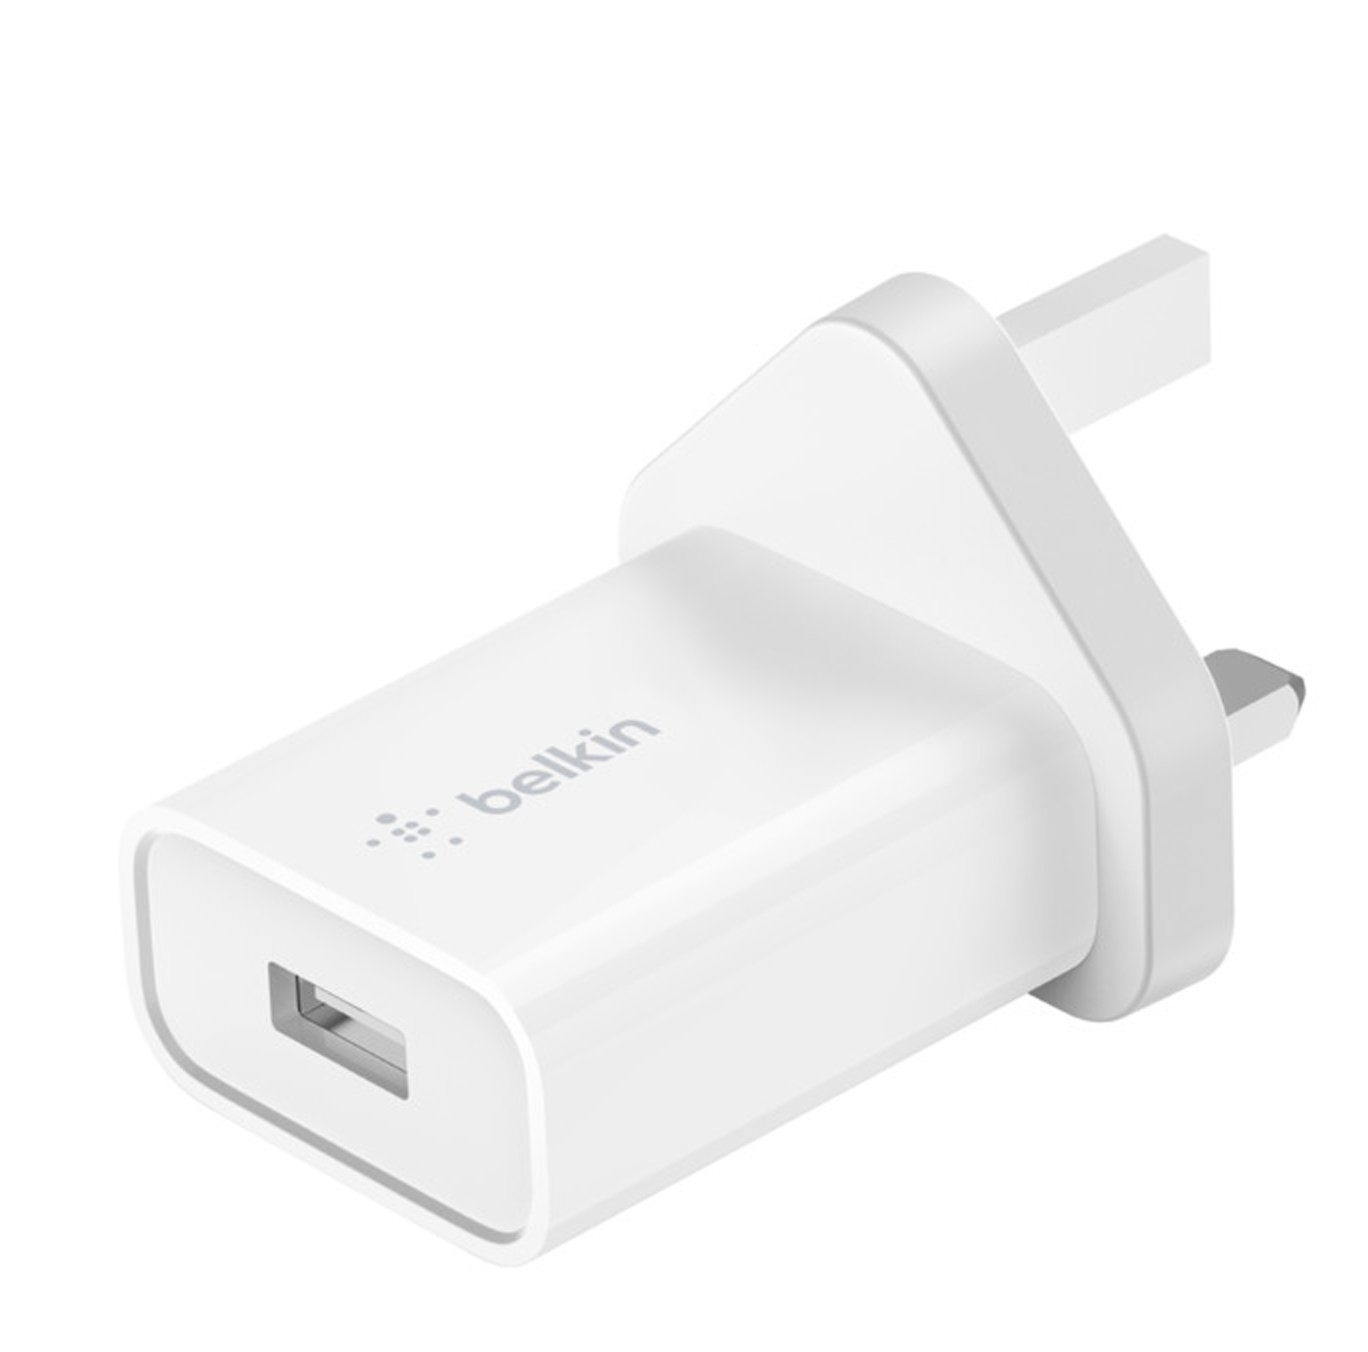 Belkin 12W USB-A Wall Charger with QC3 Plug Review